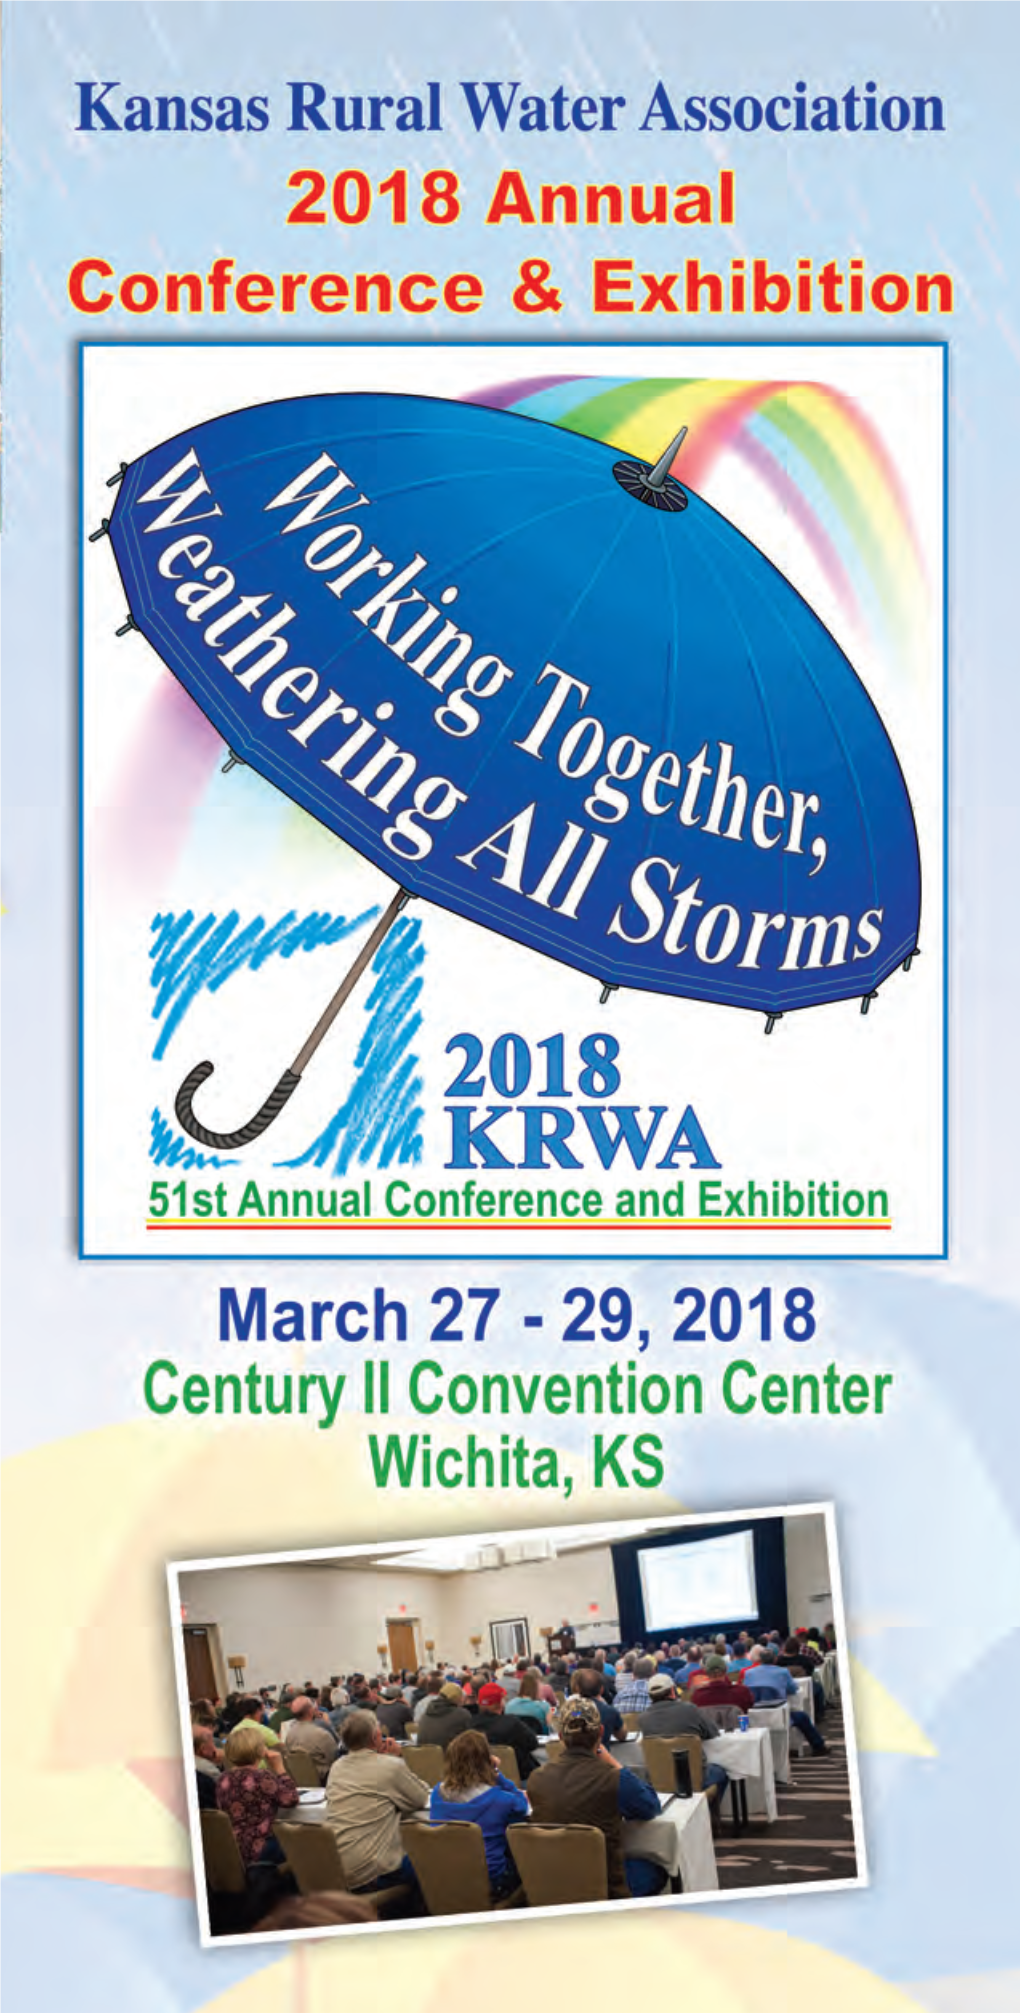 March 27 - 29, 2018 Attend the 51St Annual Conference & Exhibition for Public Water and Wastewater Utilities the Largest in Mid-America Sponsored By